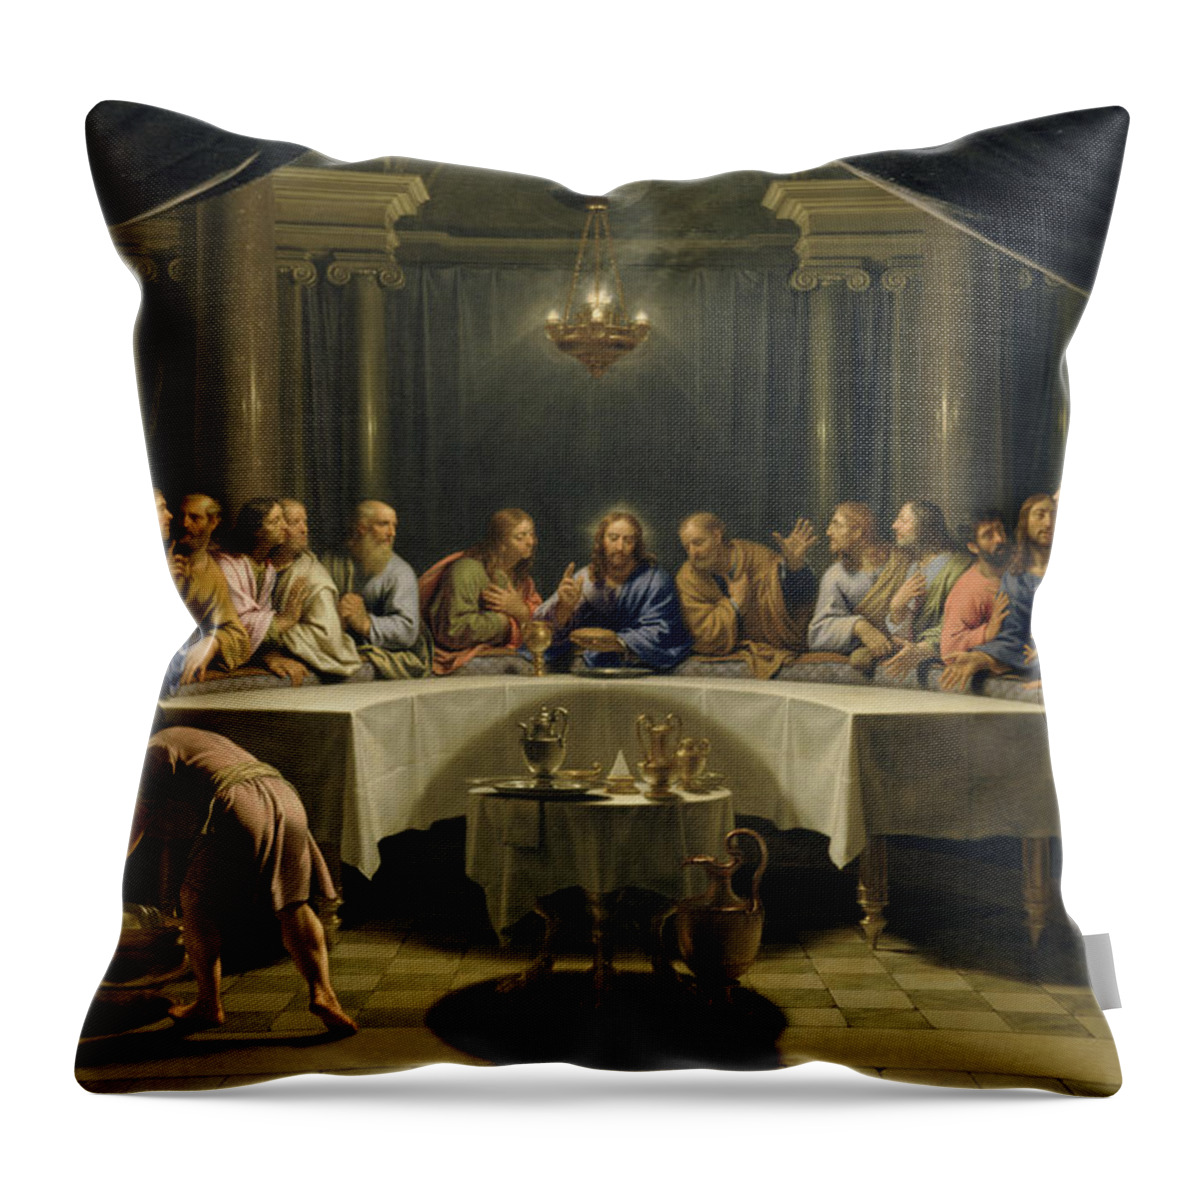 The Last Supper Throw Pillow featuring the painting The Last Supper by Jean Baptiste de Champaigne